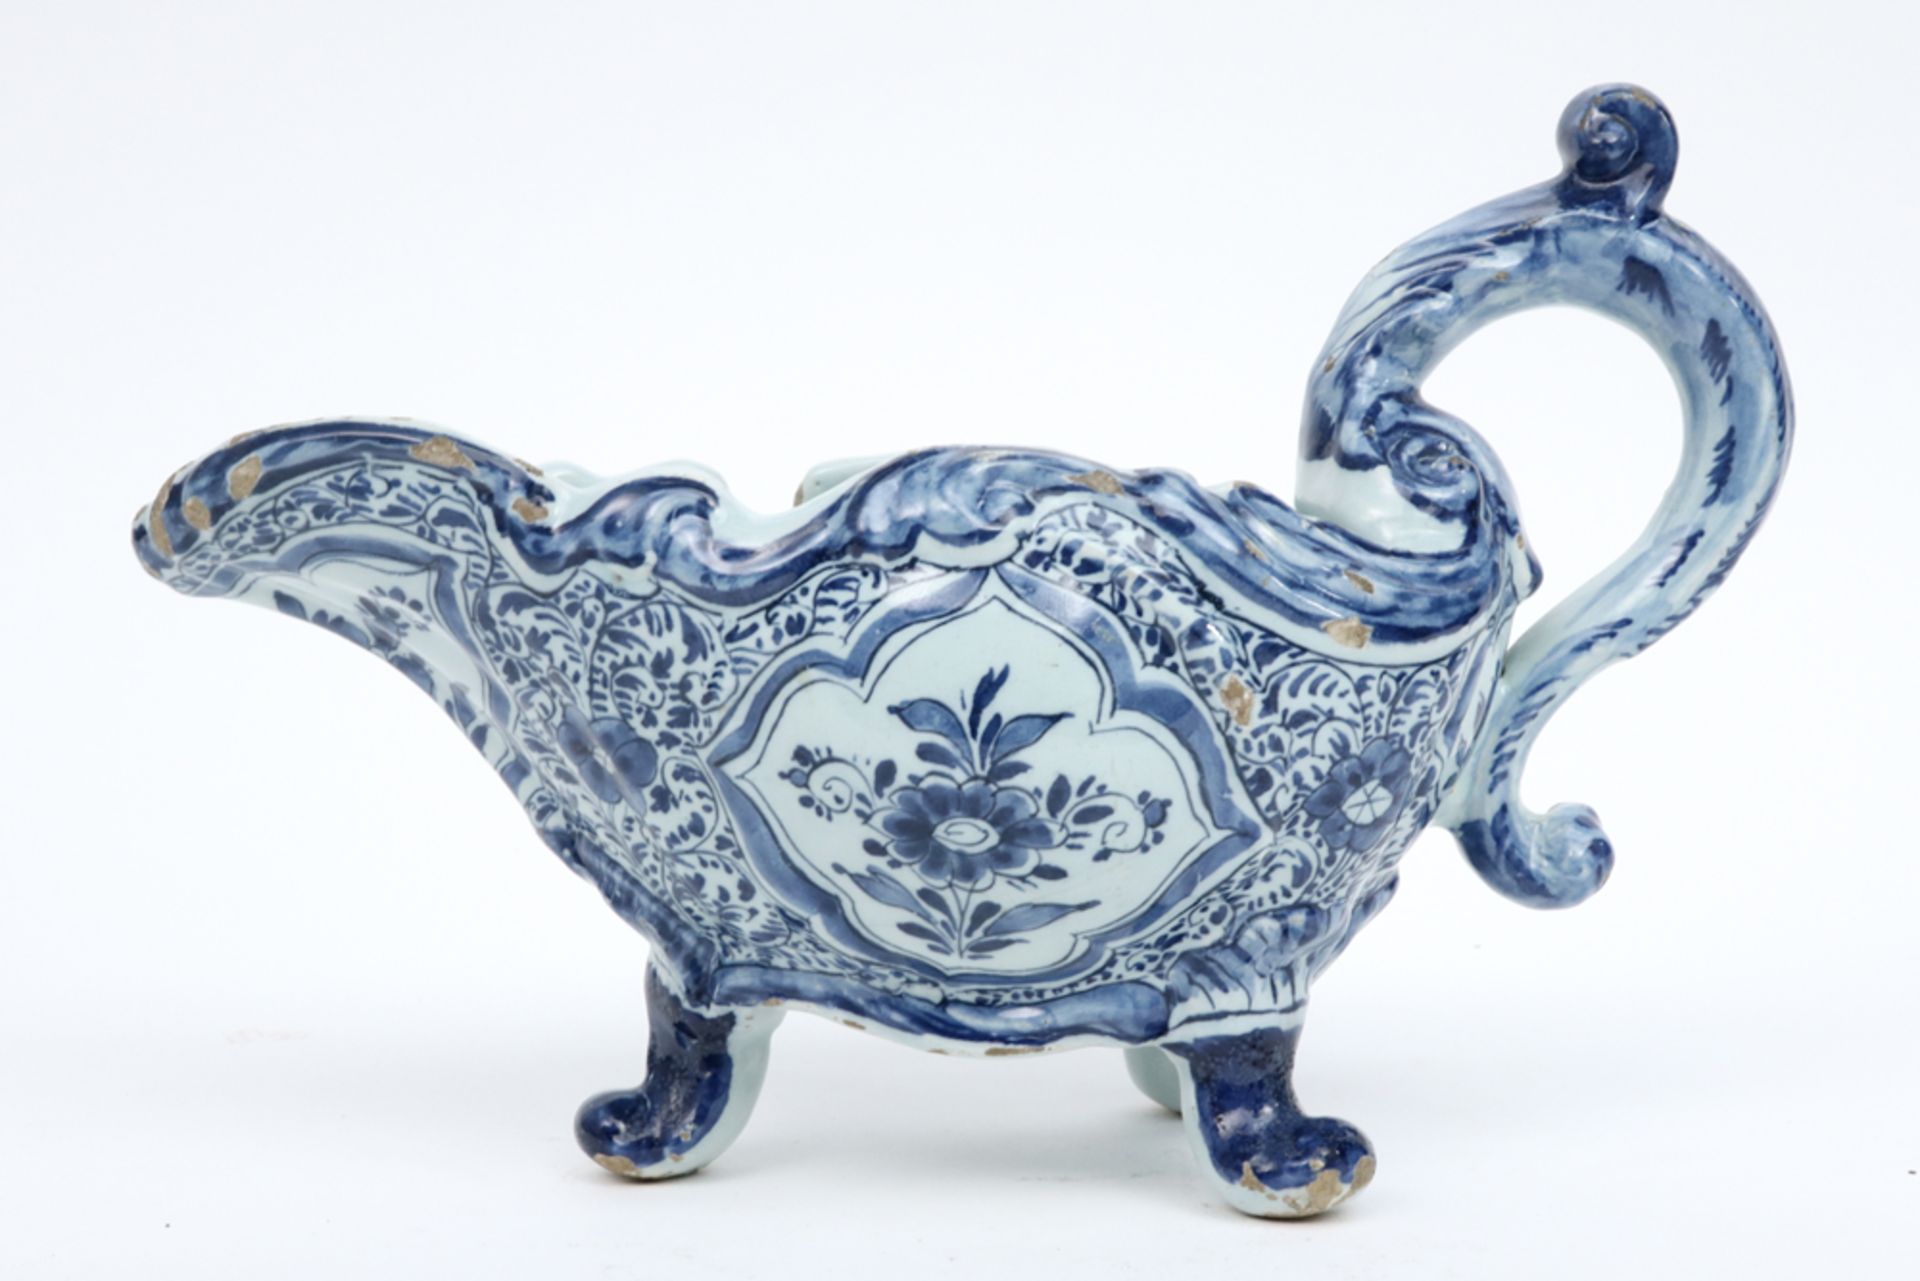 18th Cent. sauce boat in marked ceramic from Delft with a blue-white decor || Achttiende eeuwse - Image 2 of 4